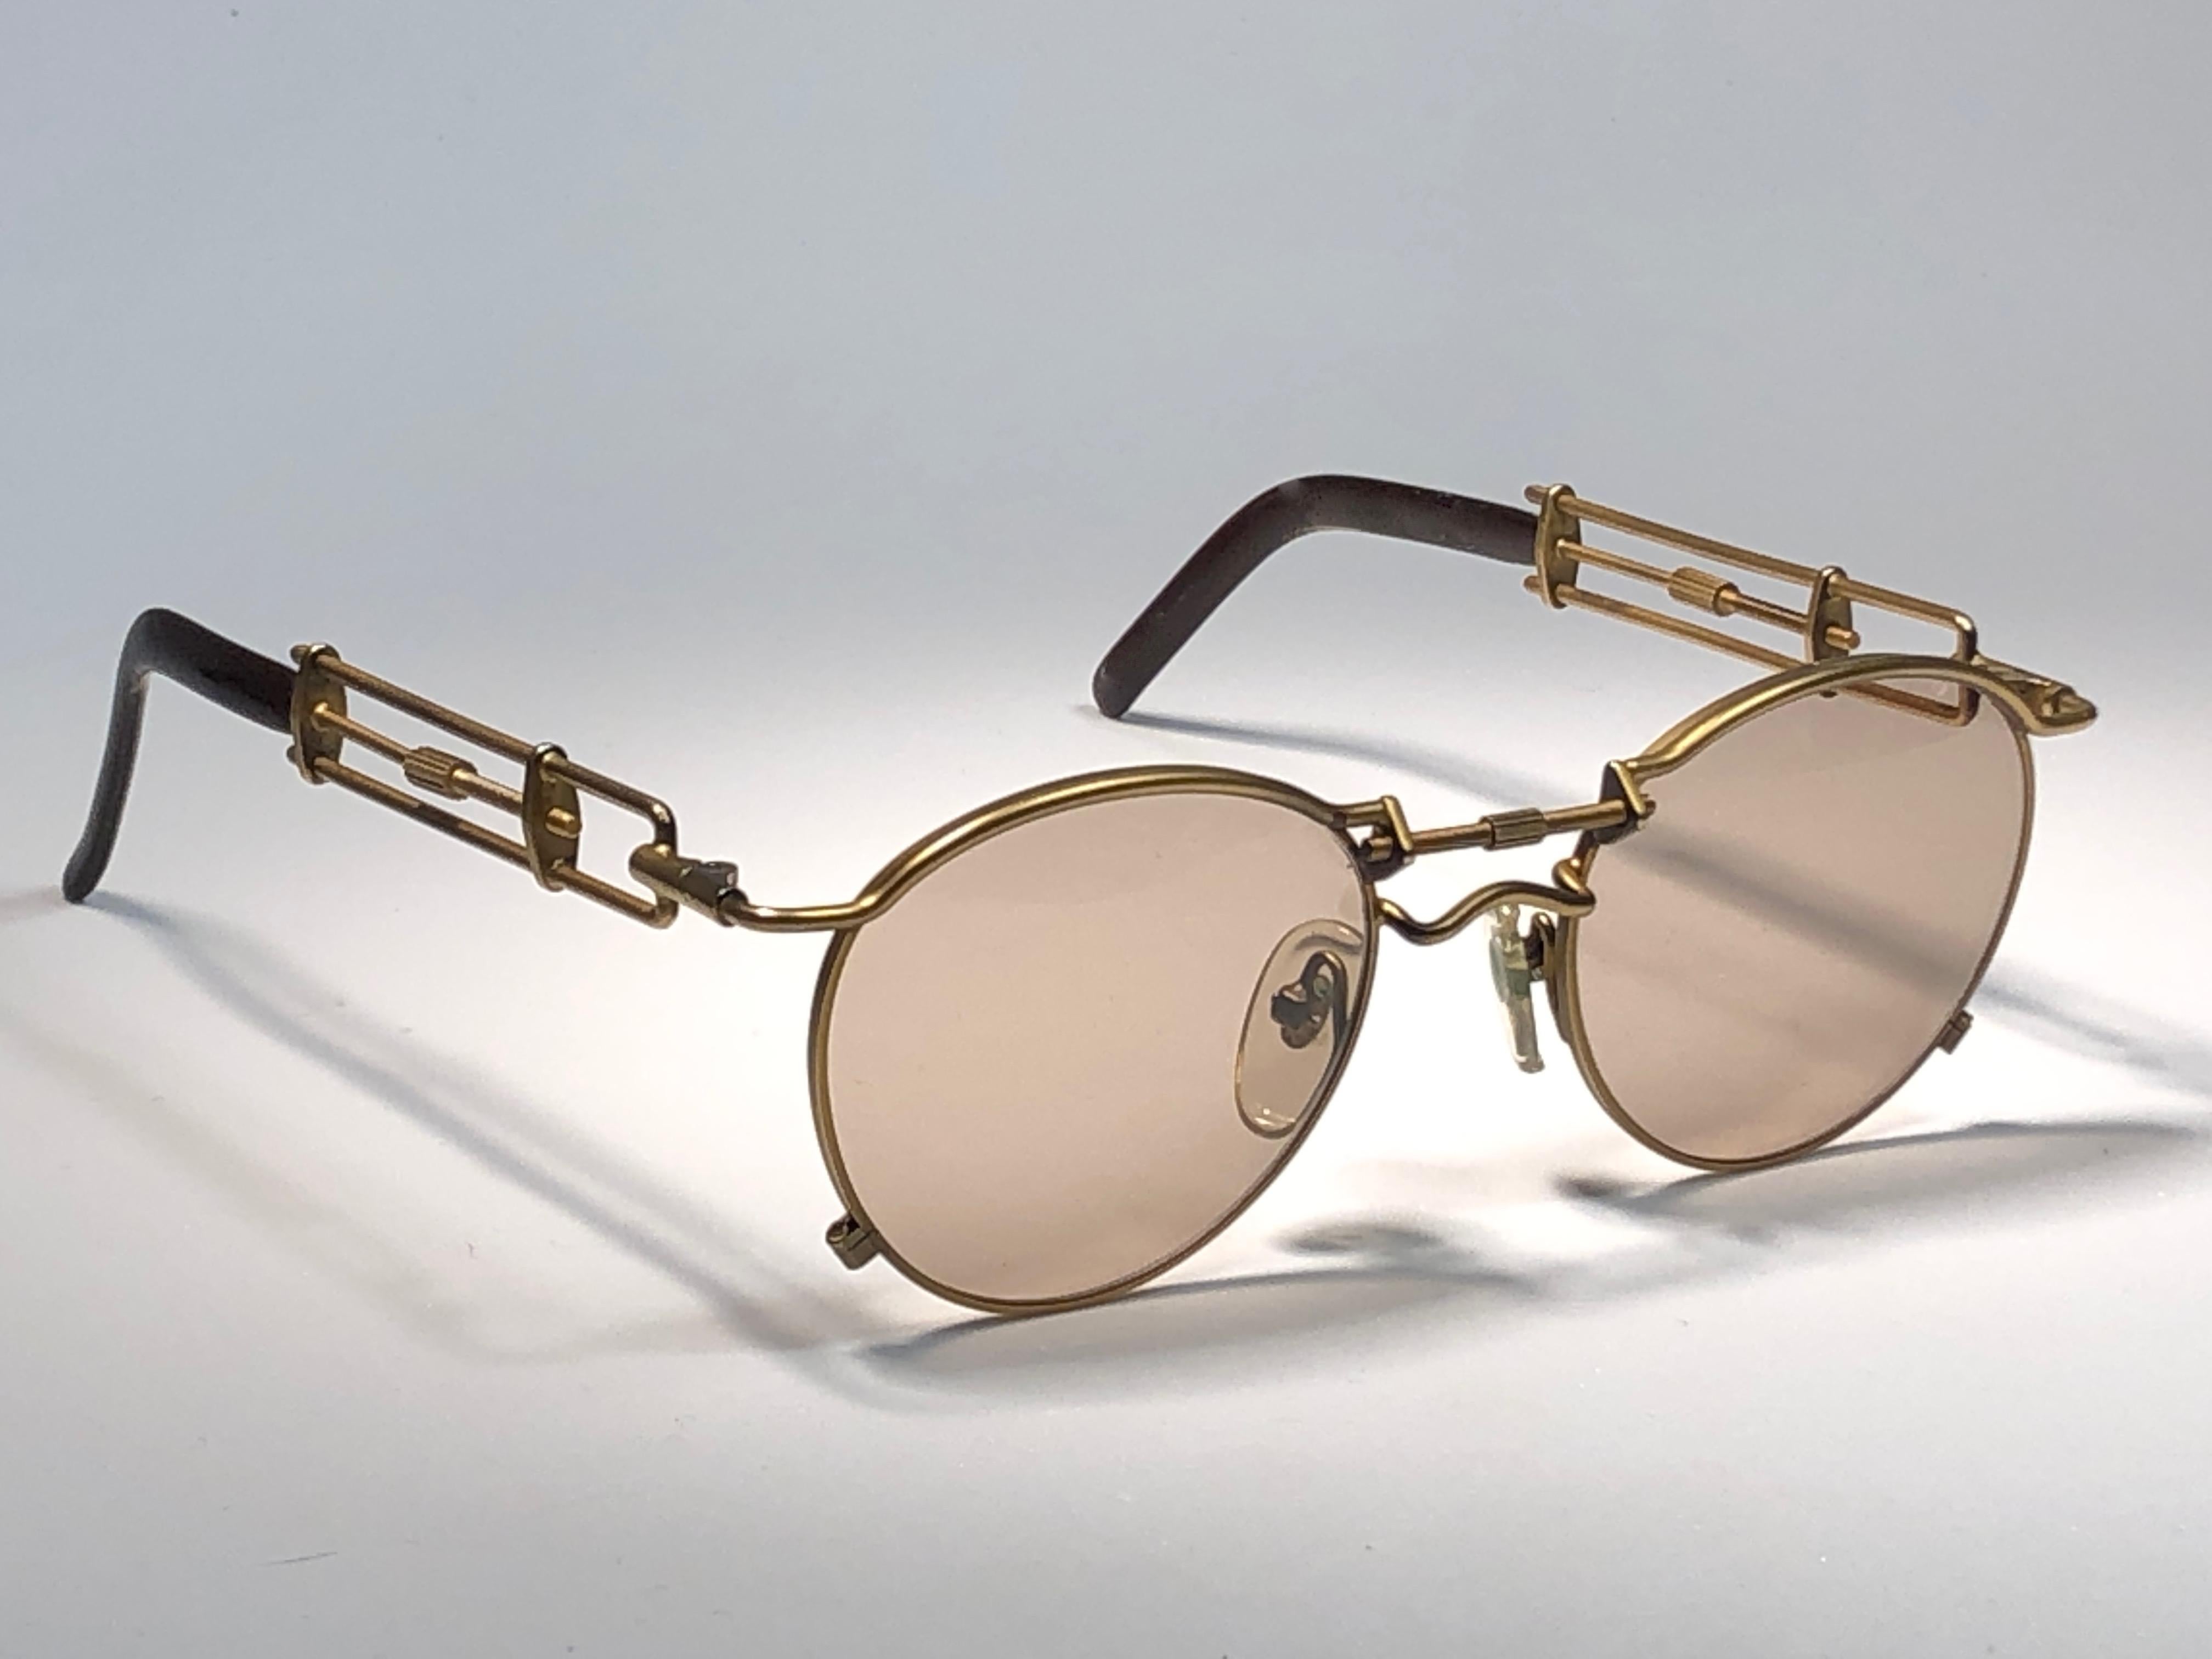 Ultra rare in this color Jean Paul Gaultier 56 0174 Copper Details frame. 
Light brown lenses that complete a ready to wear JPG look.

Amazing design with strong yet intricate details.
Design and produced in the 1900's.
Minor sign of wear due to